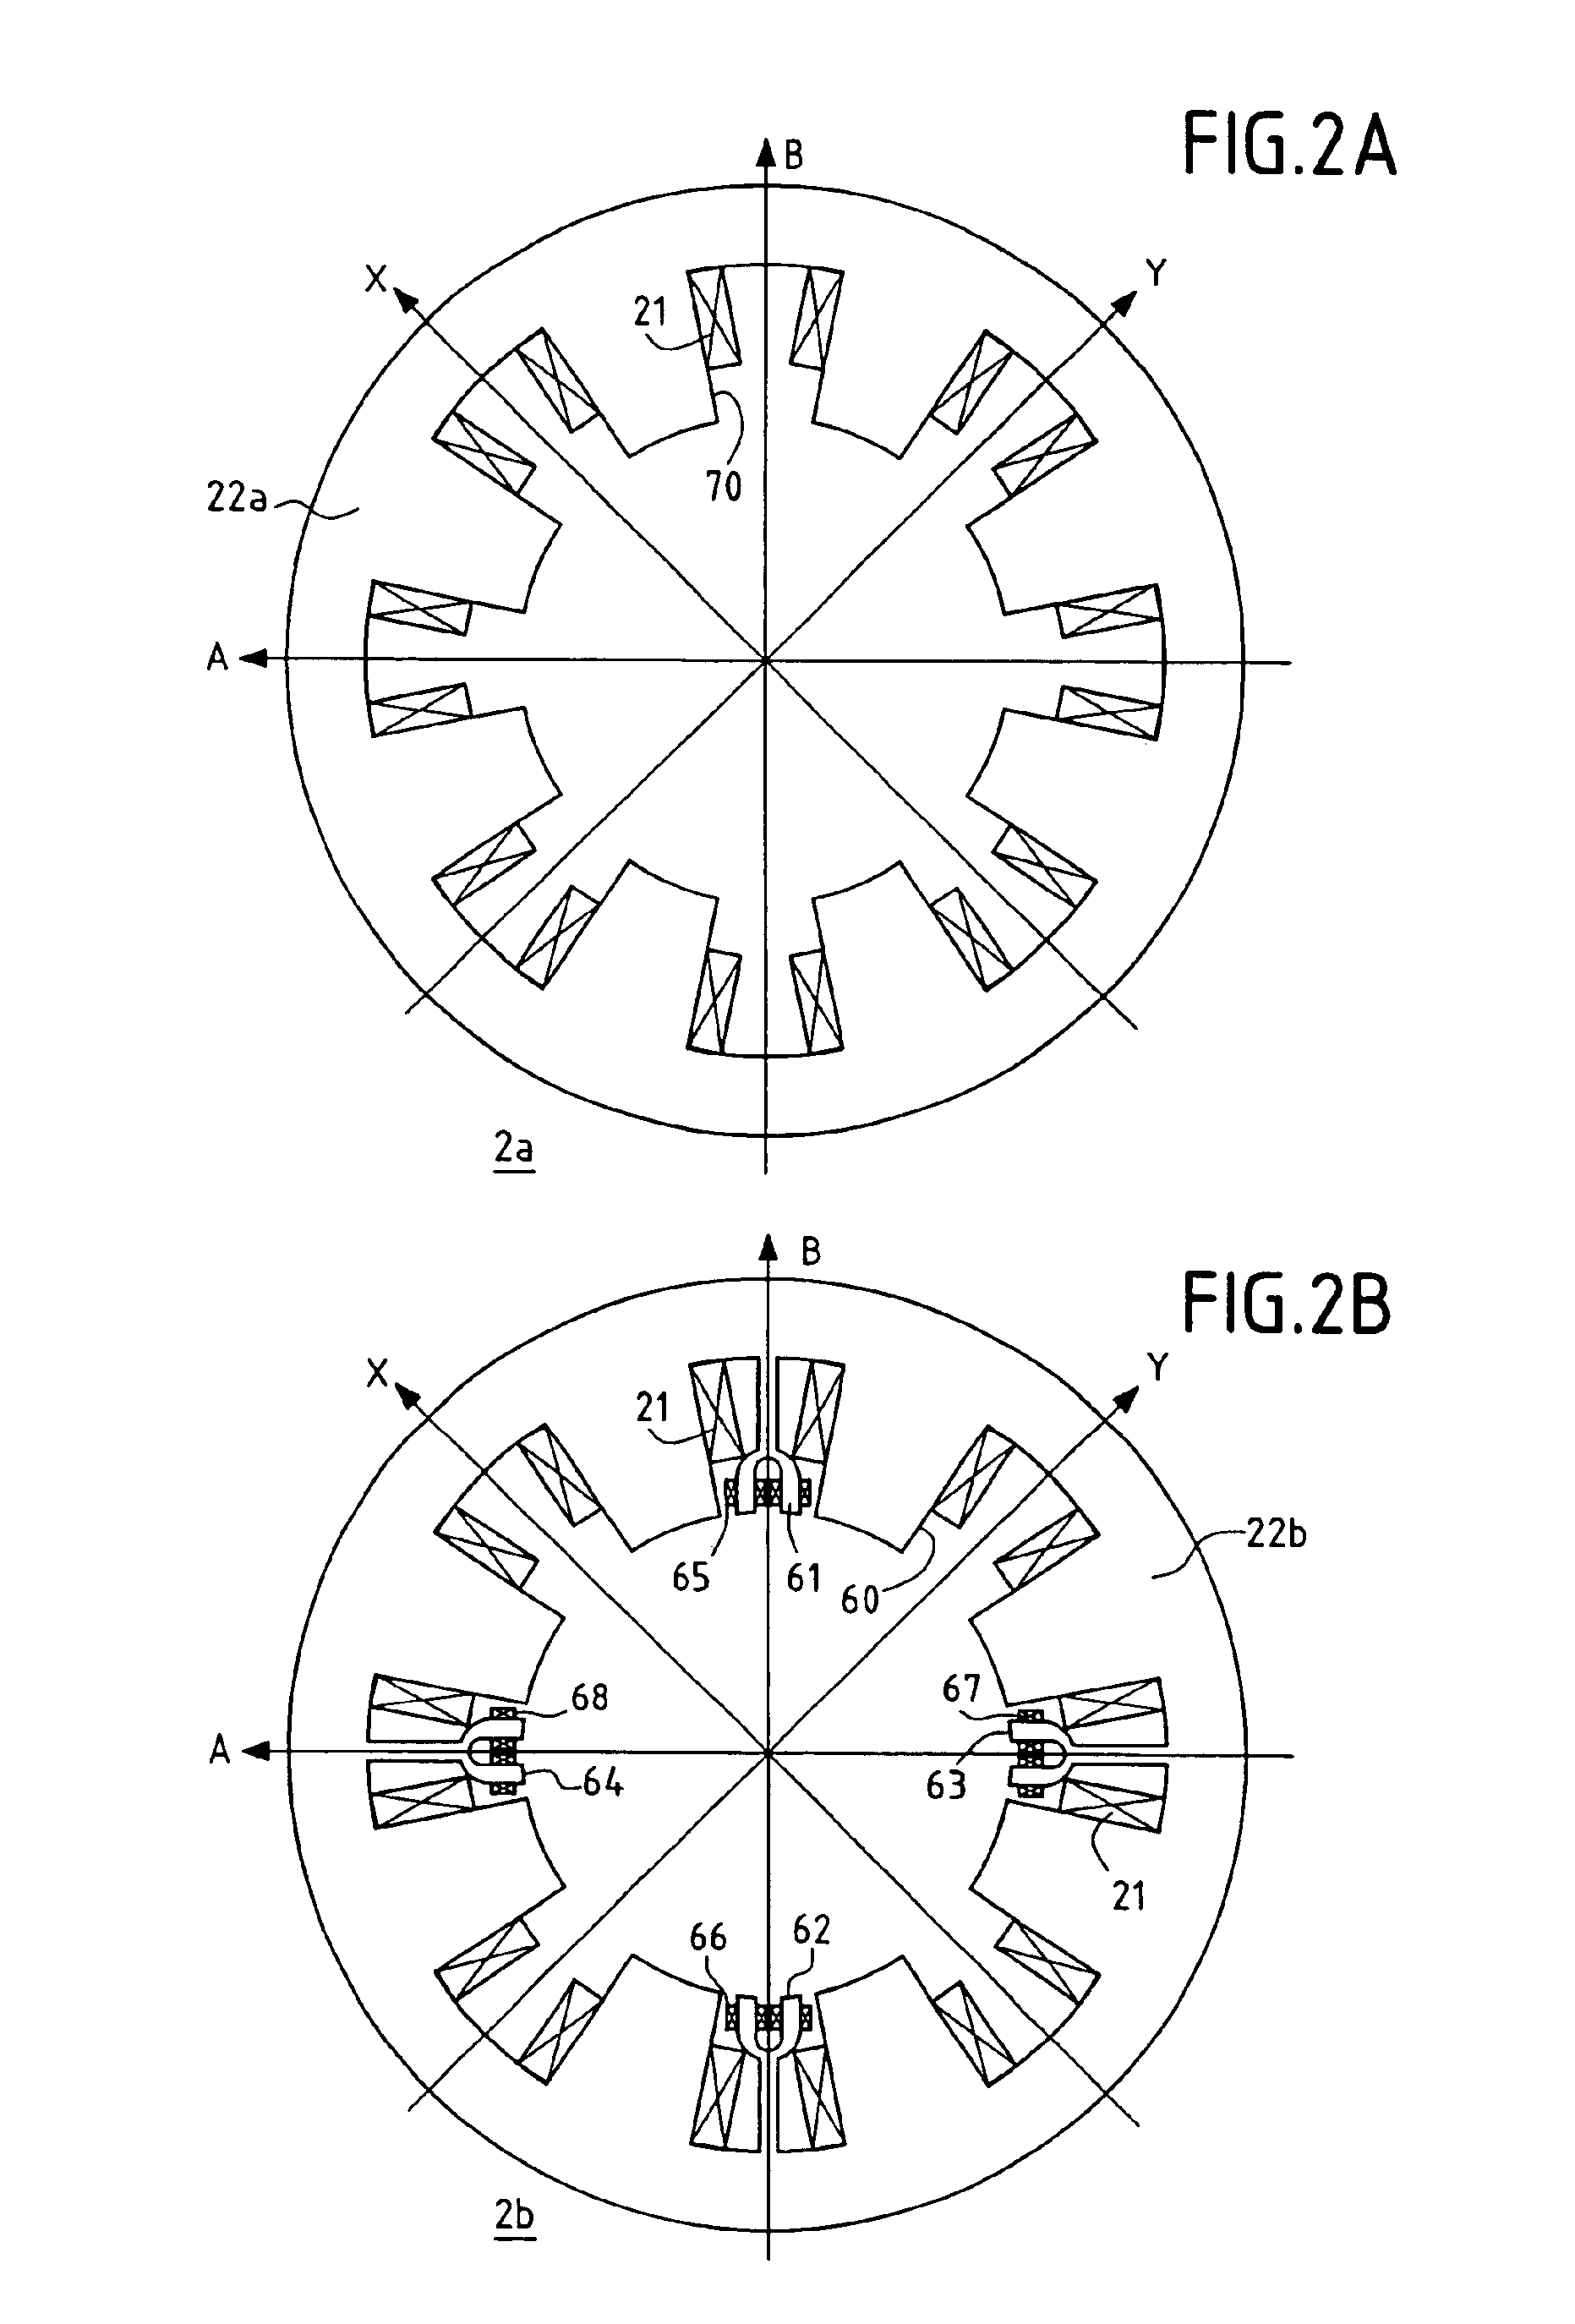 Active magnetic bearing with integrated detectors